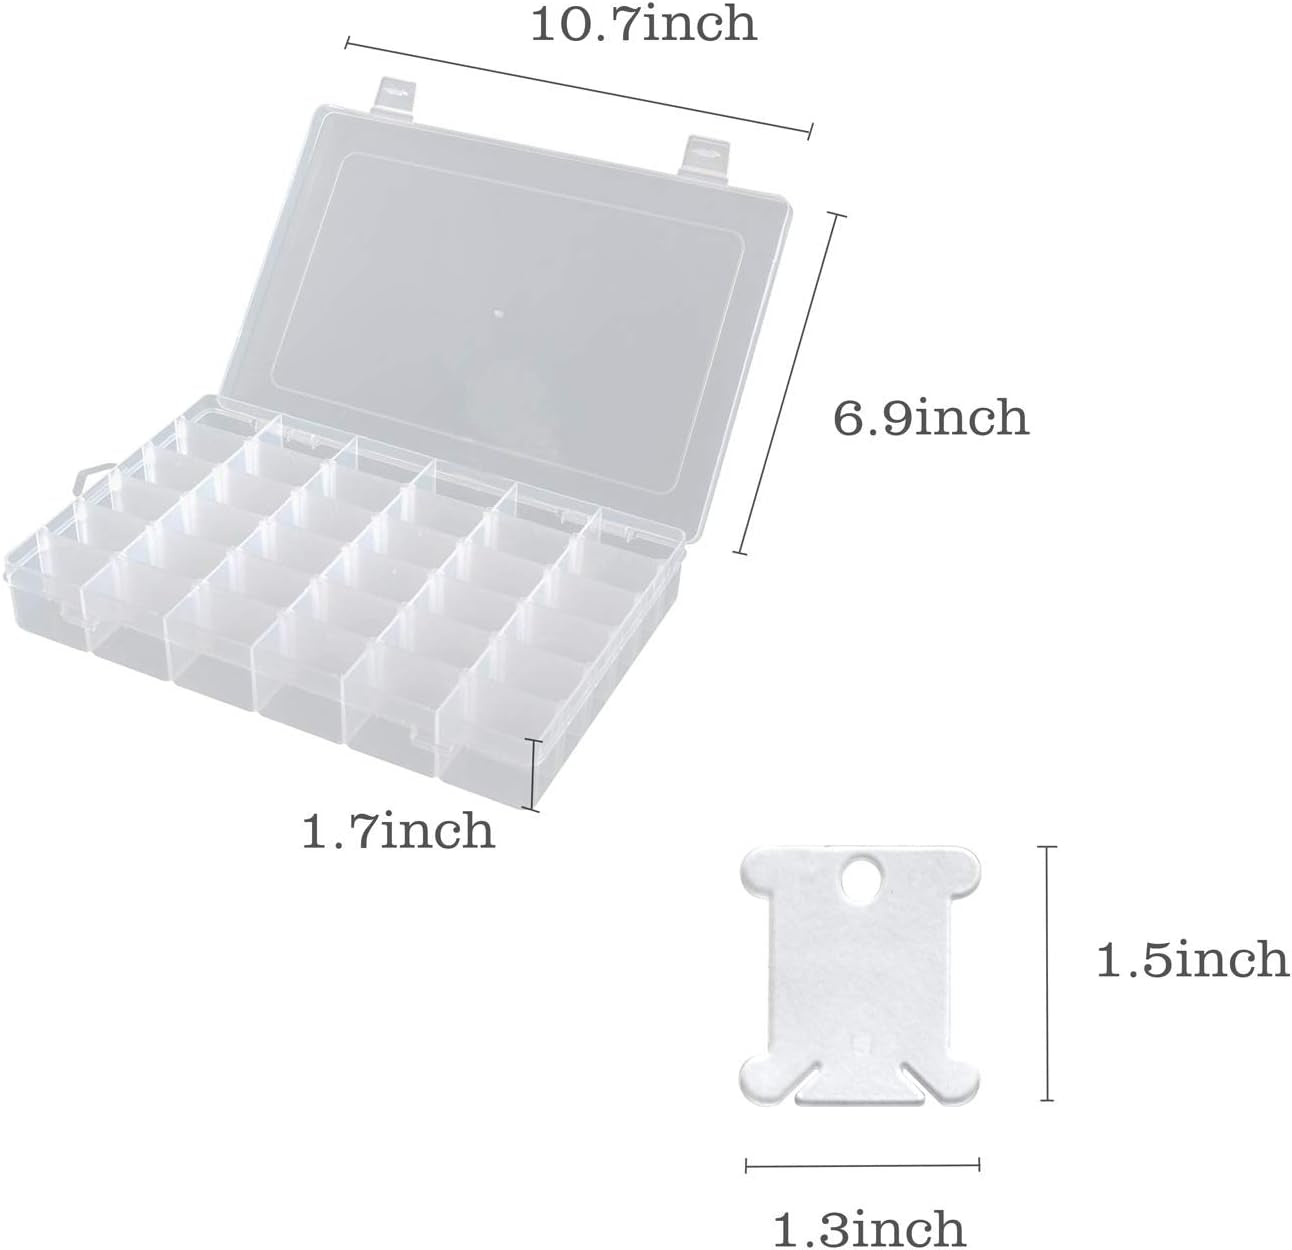 120 Pieces Plastic Floss Bobbins with 36 Grids Embroidery Floss Cross Stitch Organizer Box, White